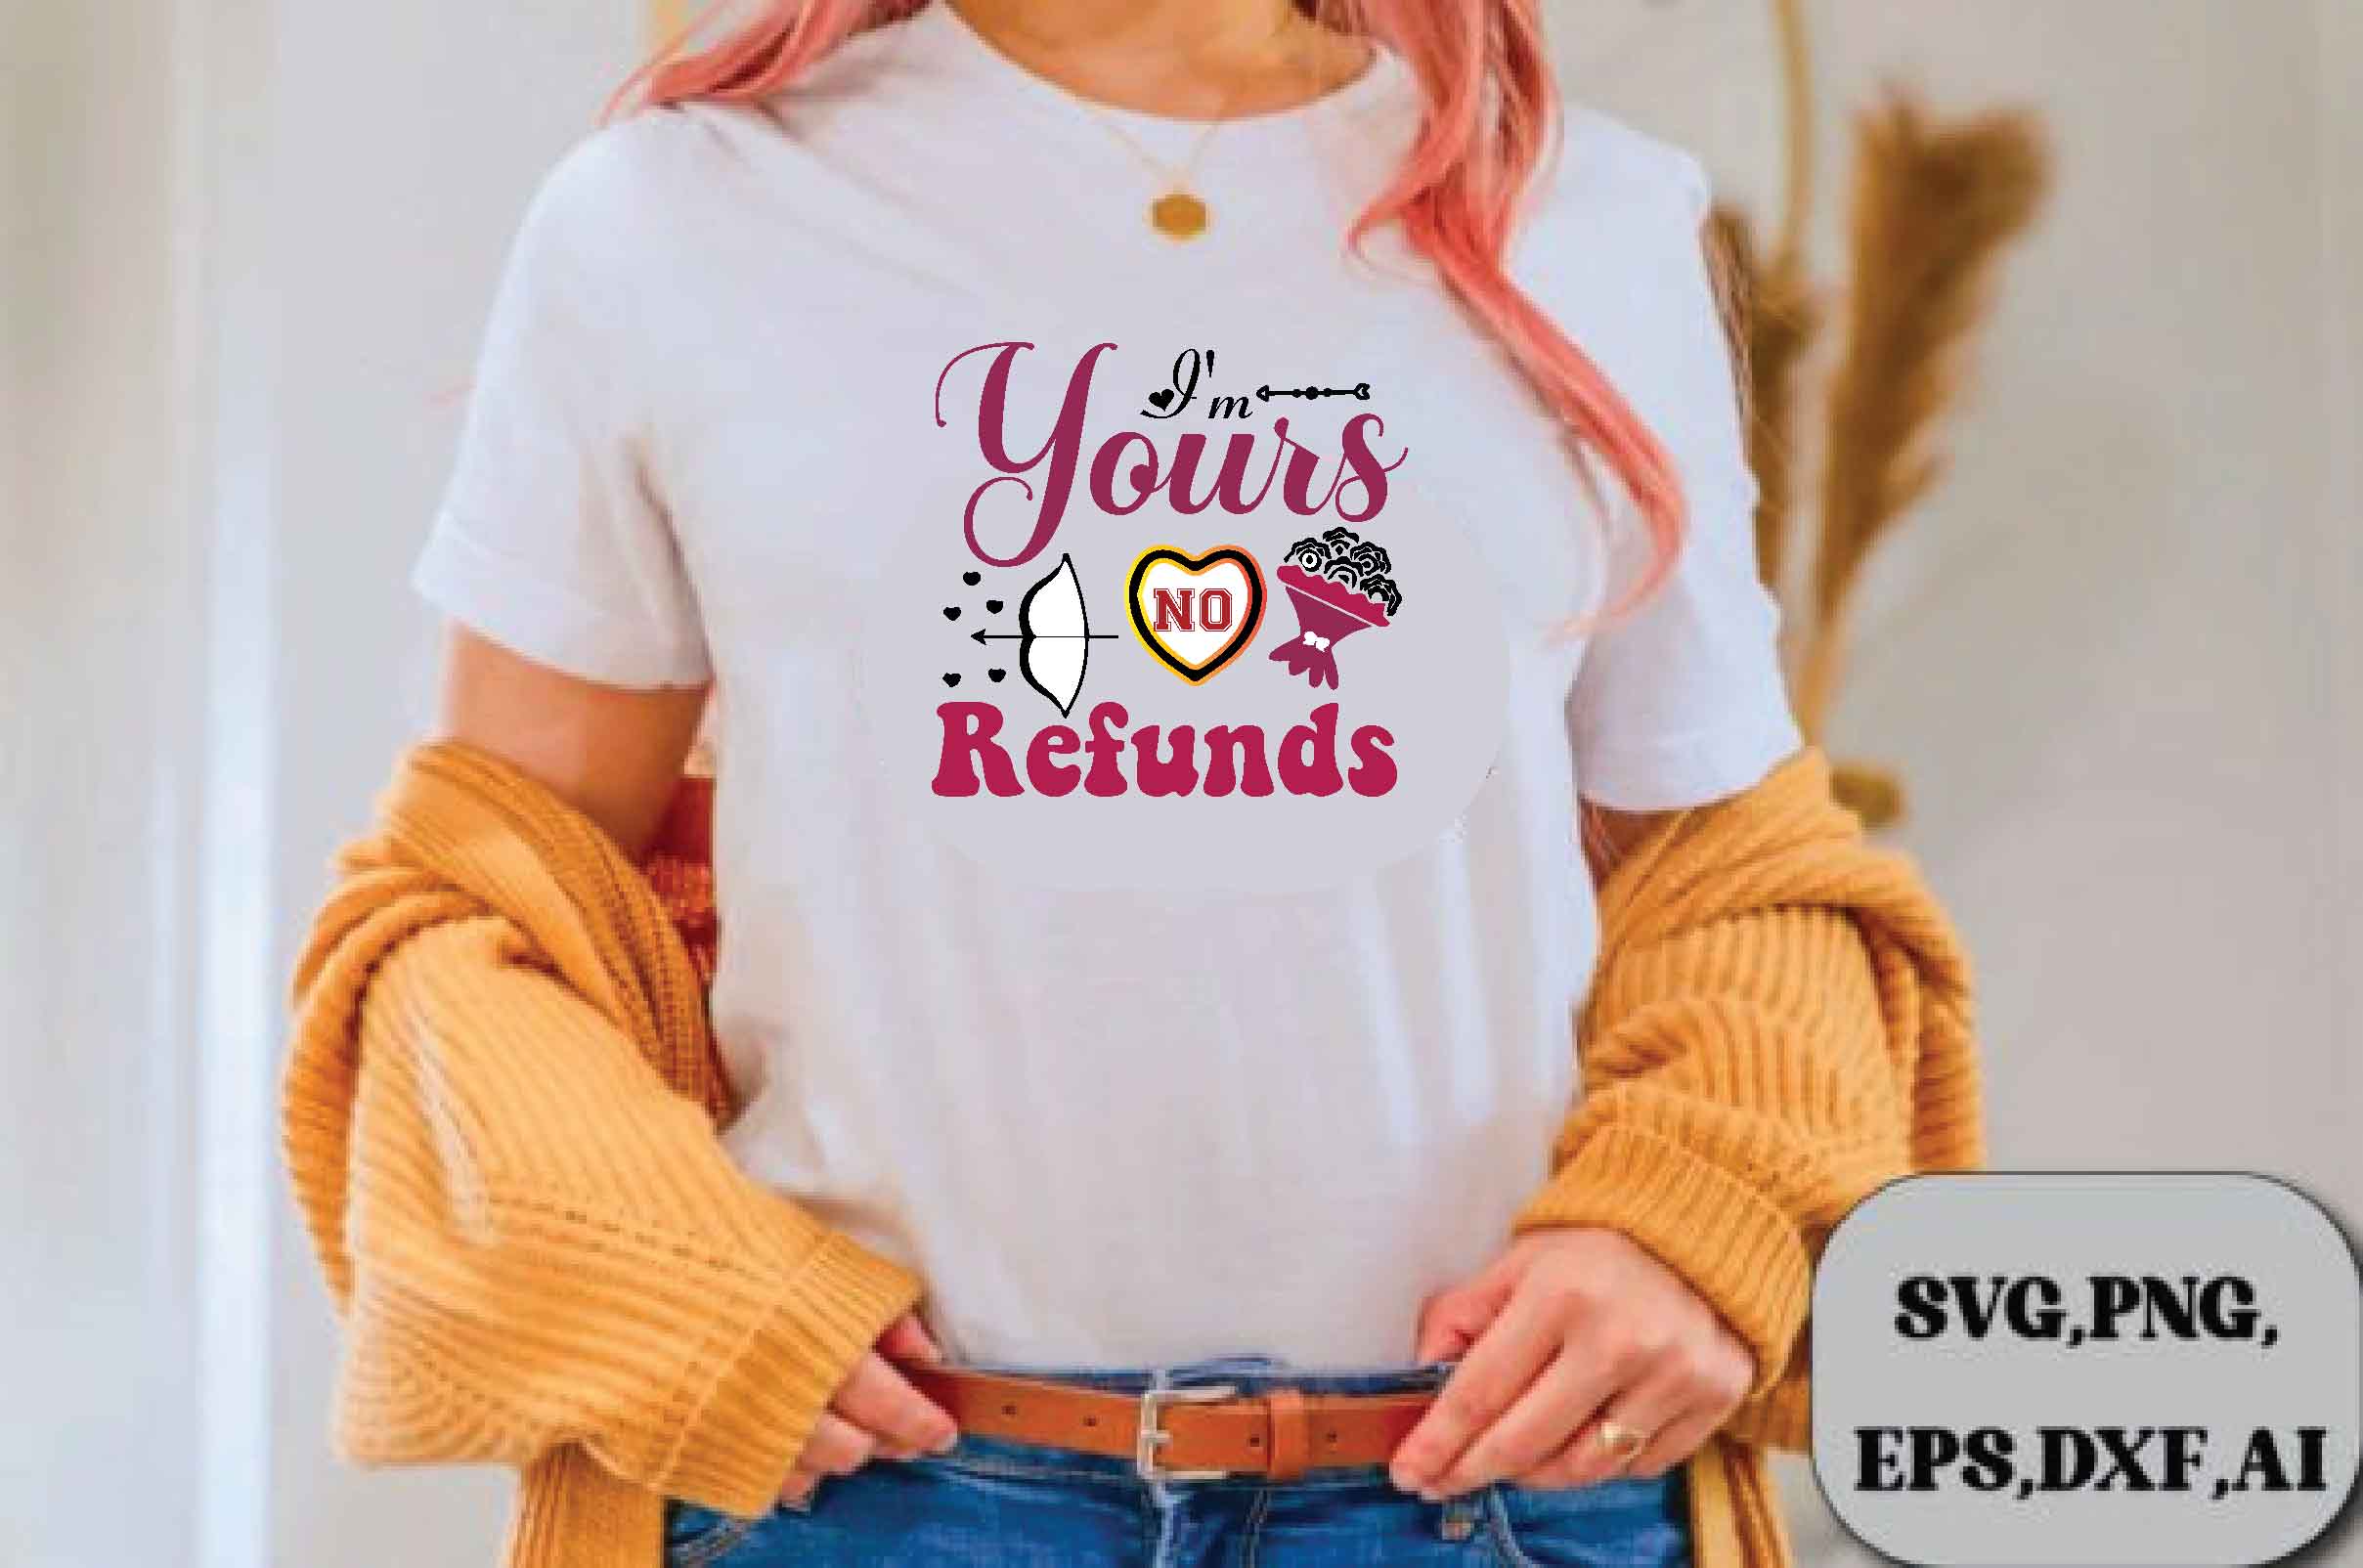 Image of a white t-shirt with a colorful inscription im yours no refunds